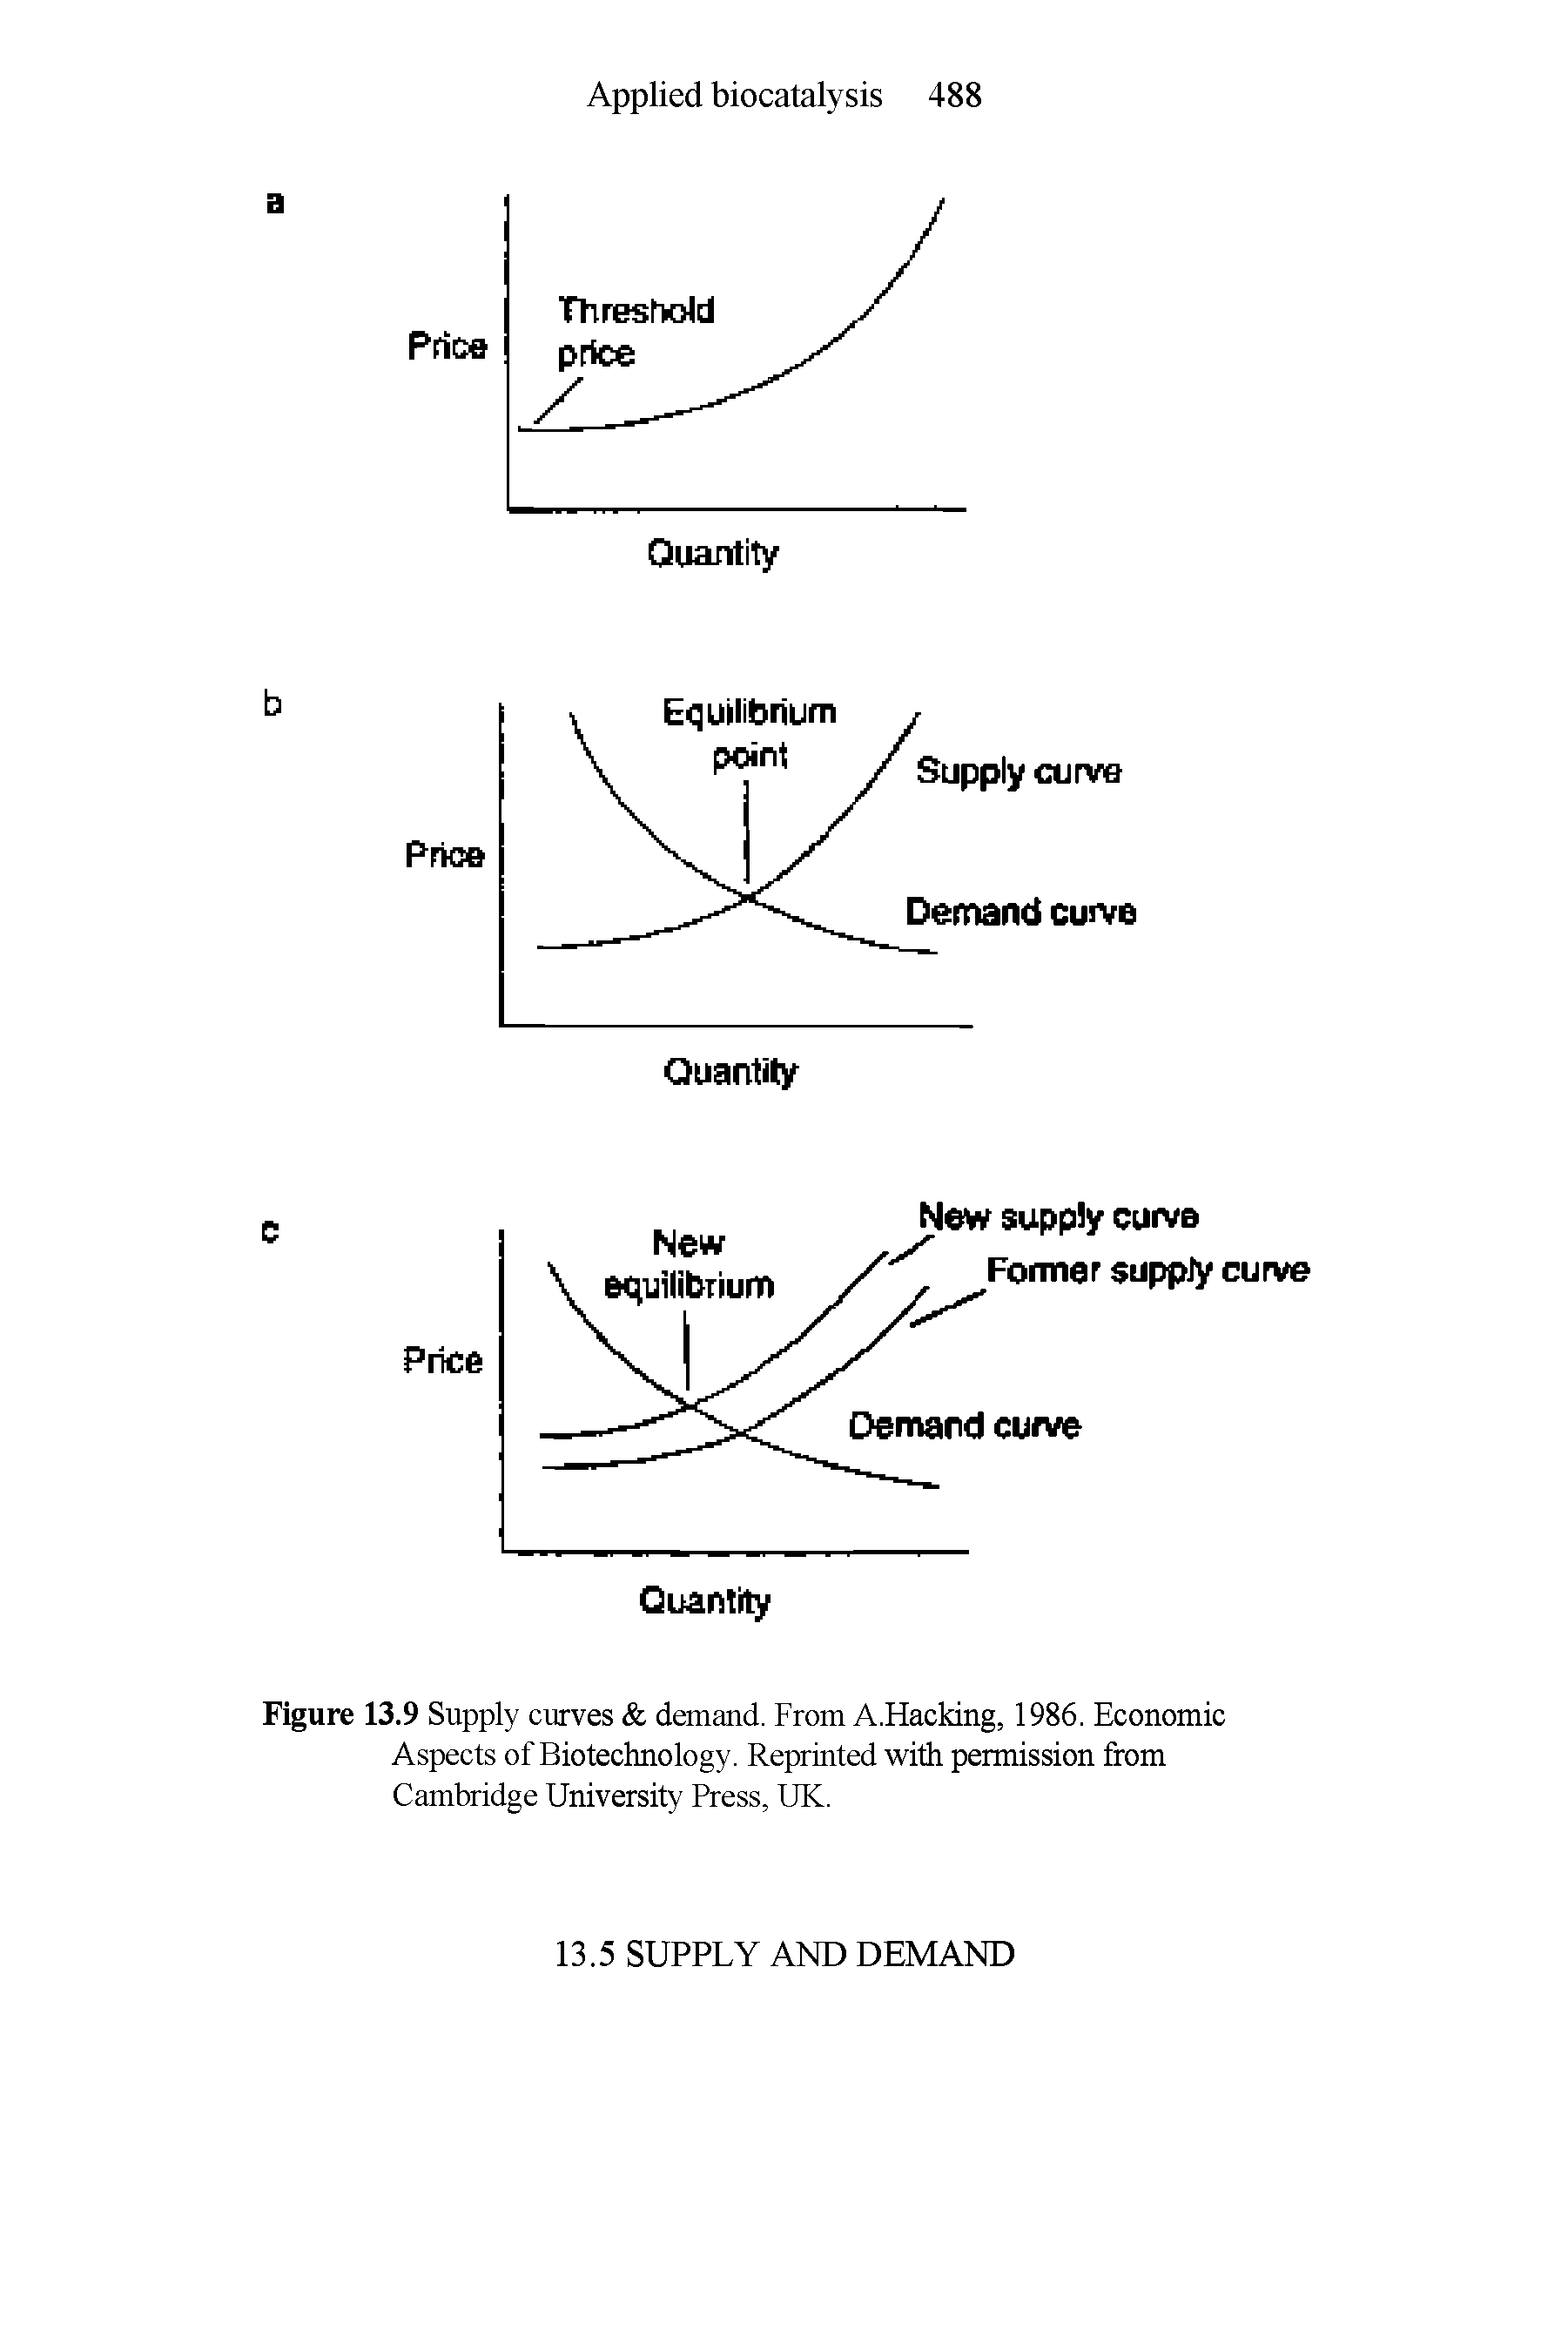 Figure 13.9 Supply curves demand. From A.Hacking, 1986. Economic Aspects of Biotechnology. Reprinted with permission from Cambridge University Press, UK.